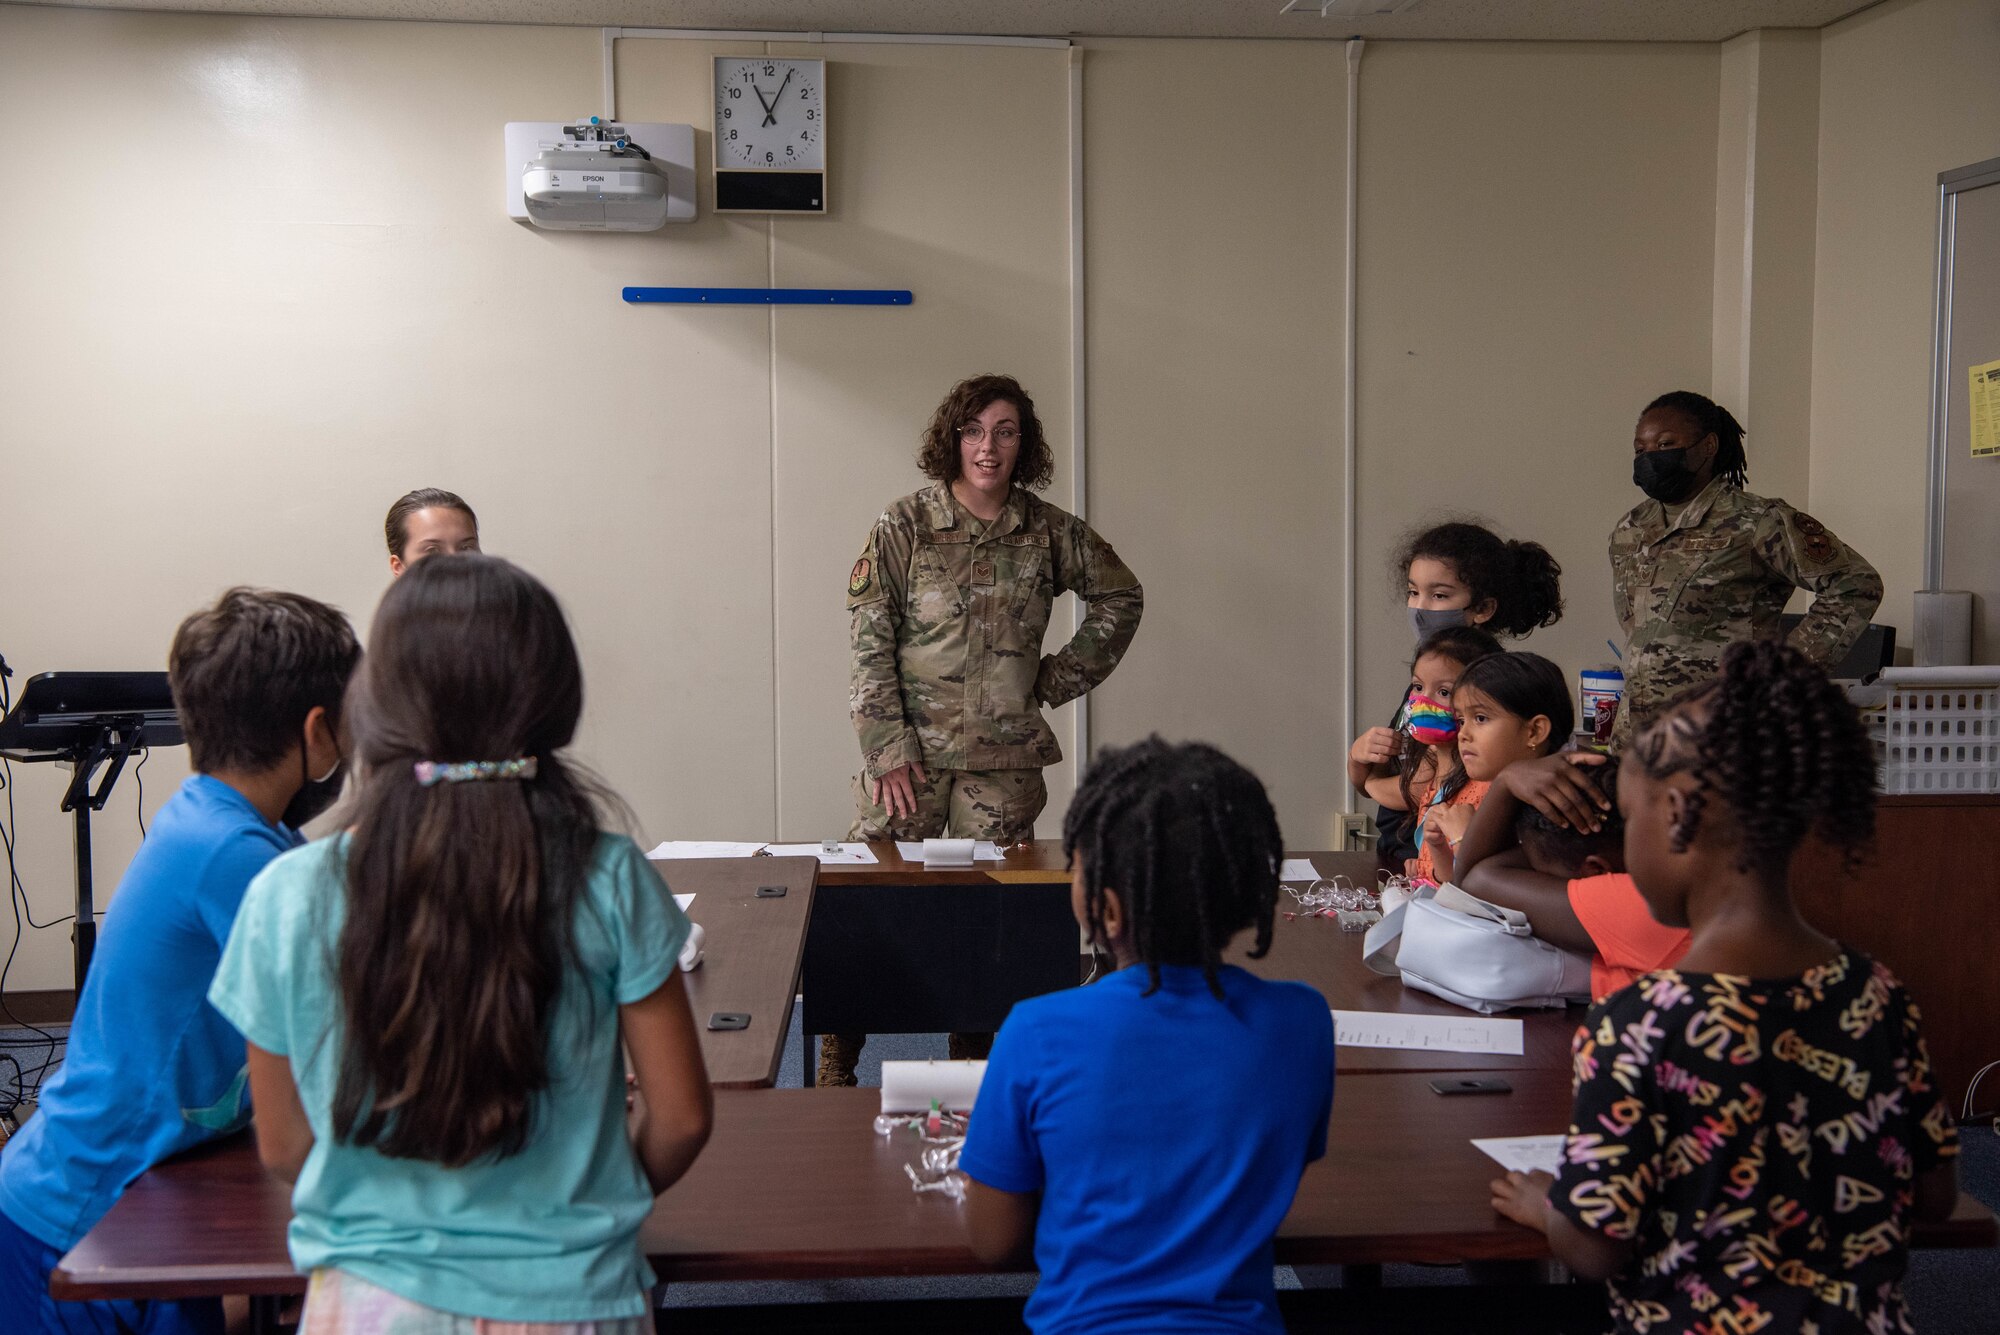 An Airman gives a presentation to a group of students.